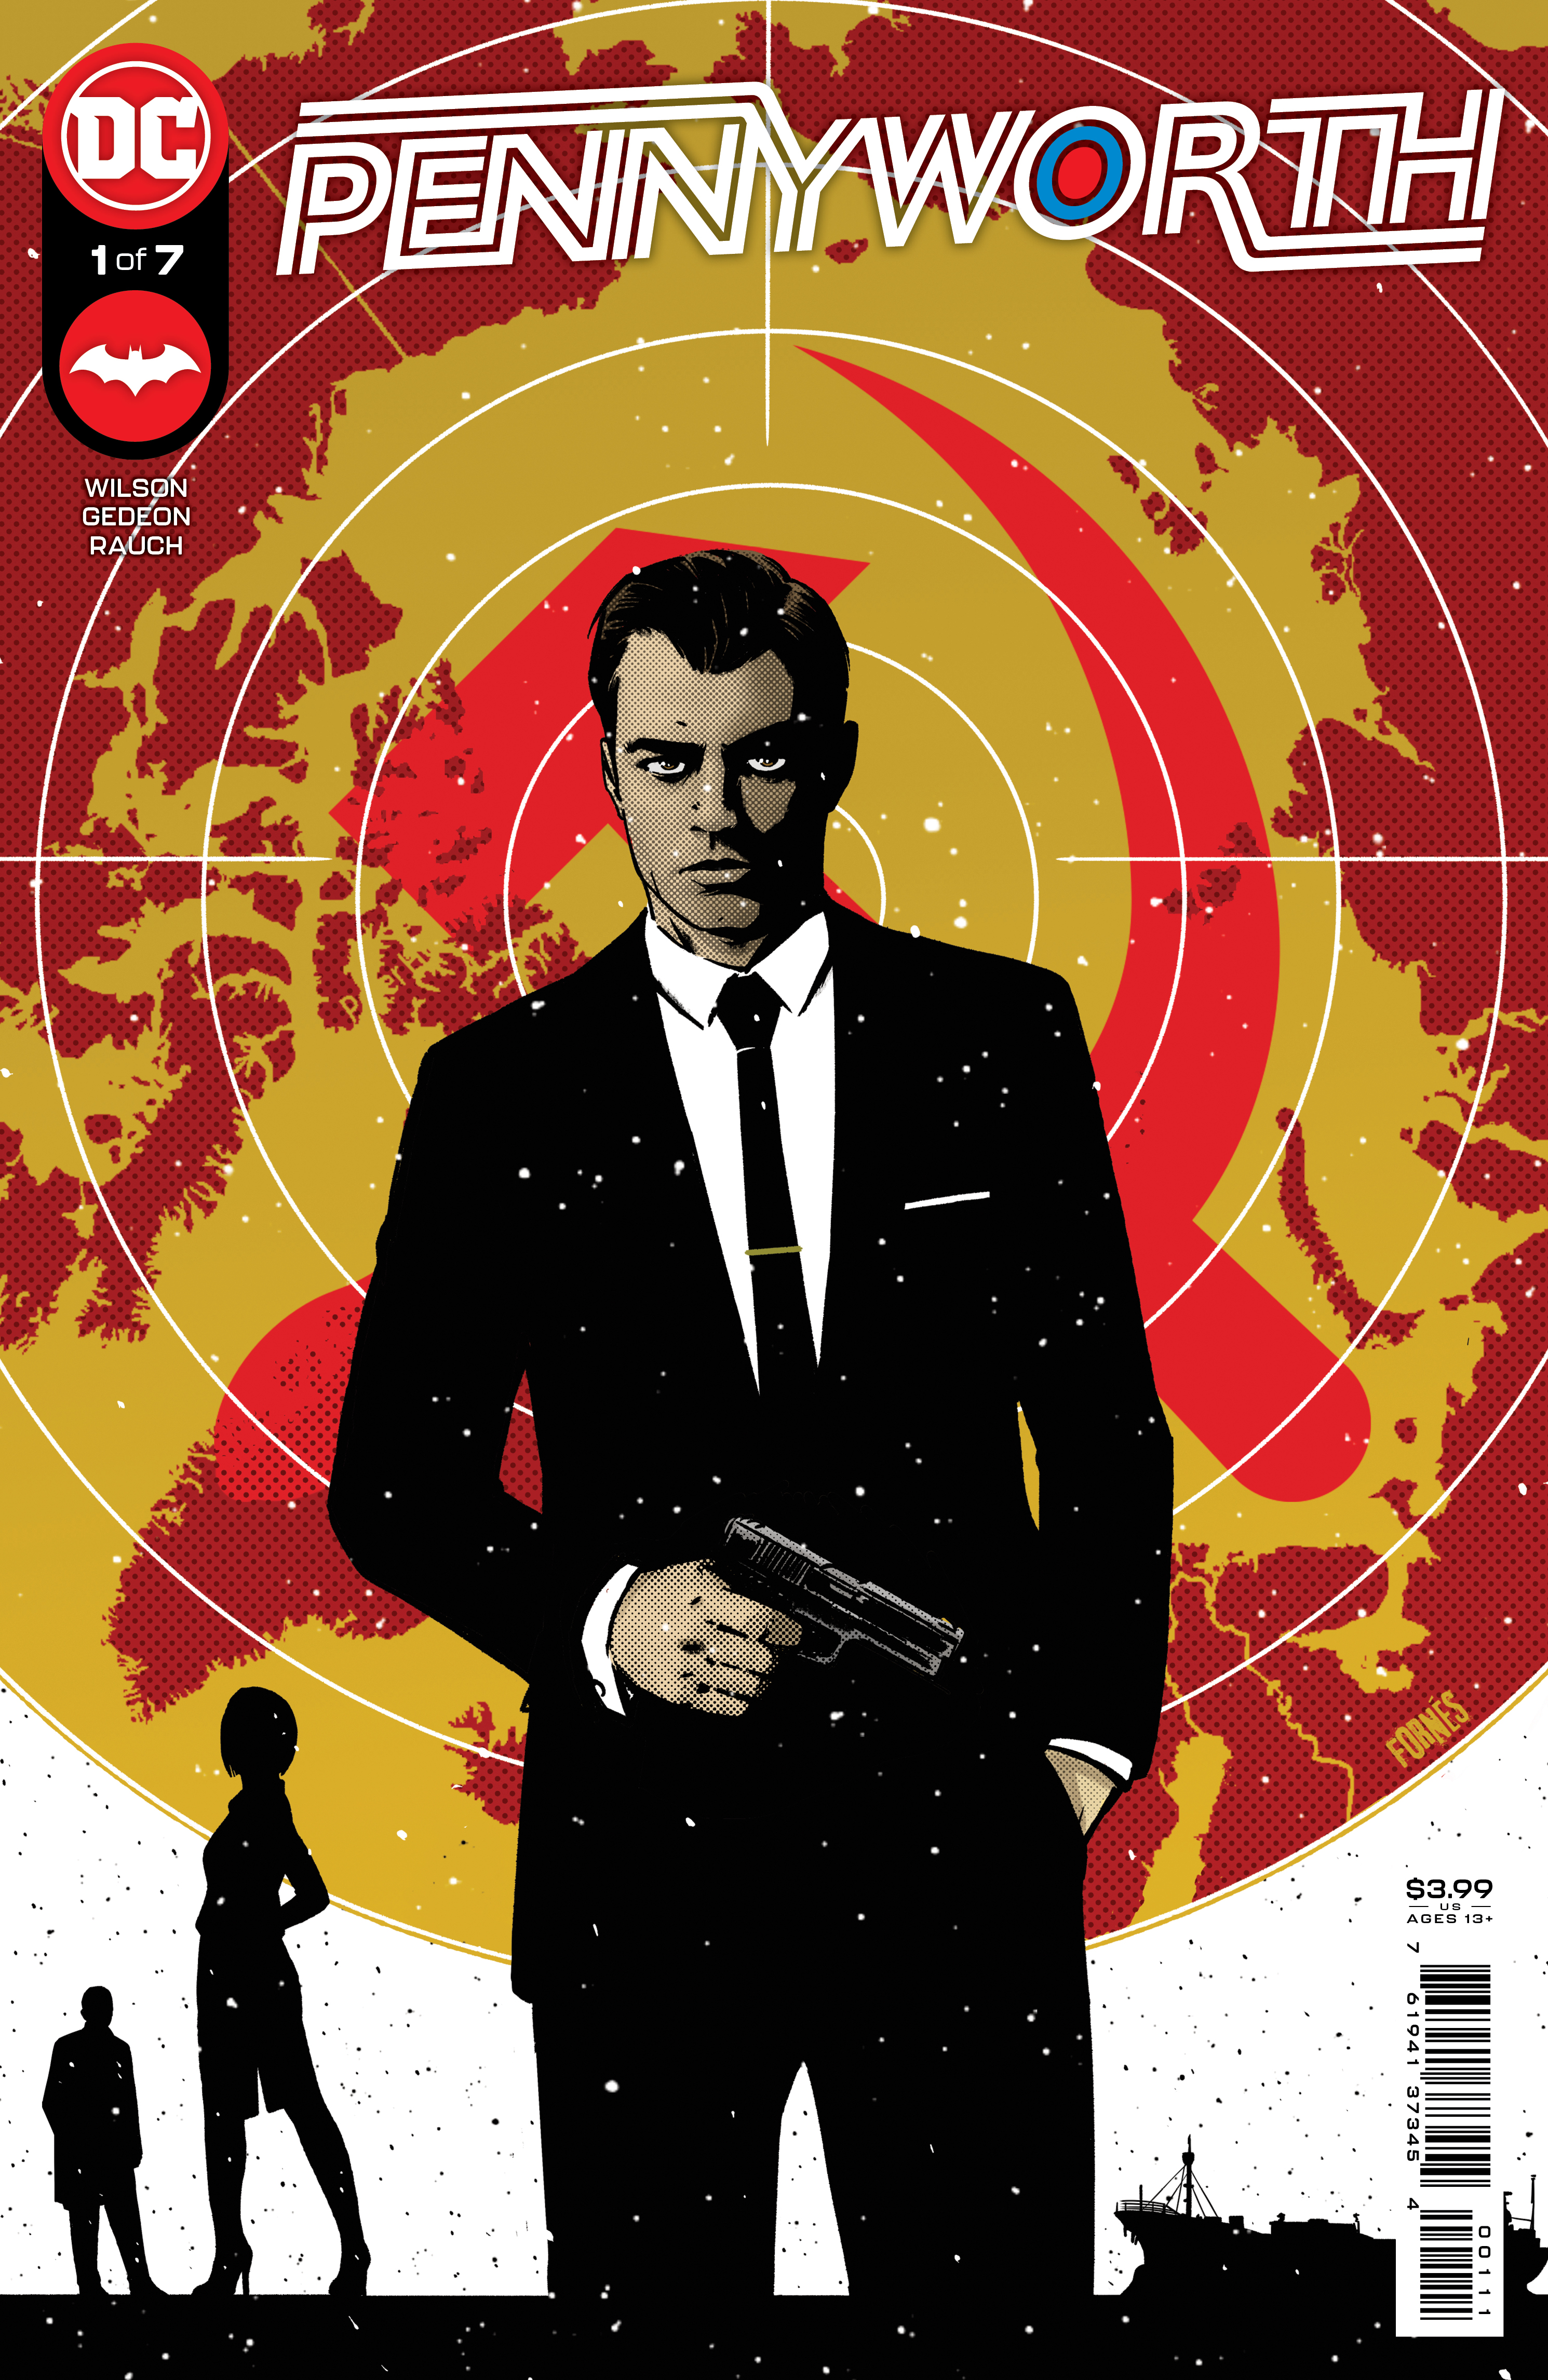 Pennyworth #1 Cover A Jorge Fornes (Of 7)